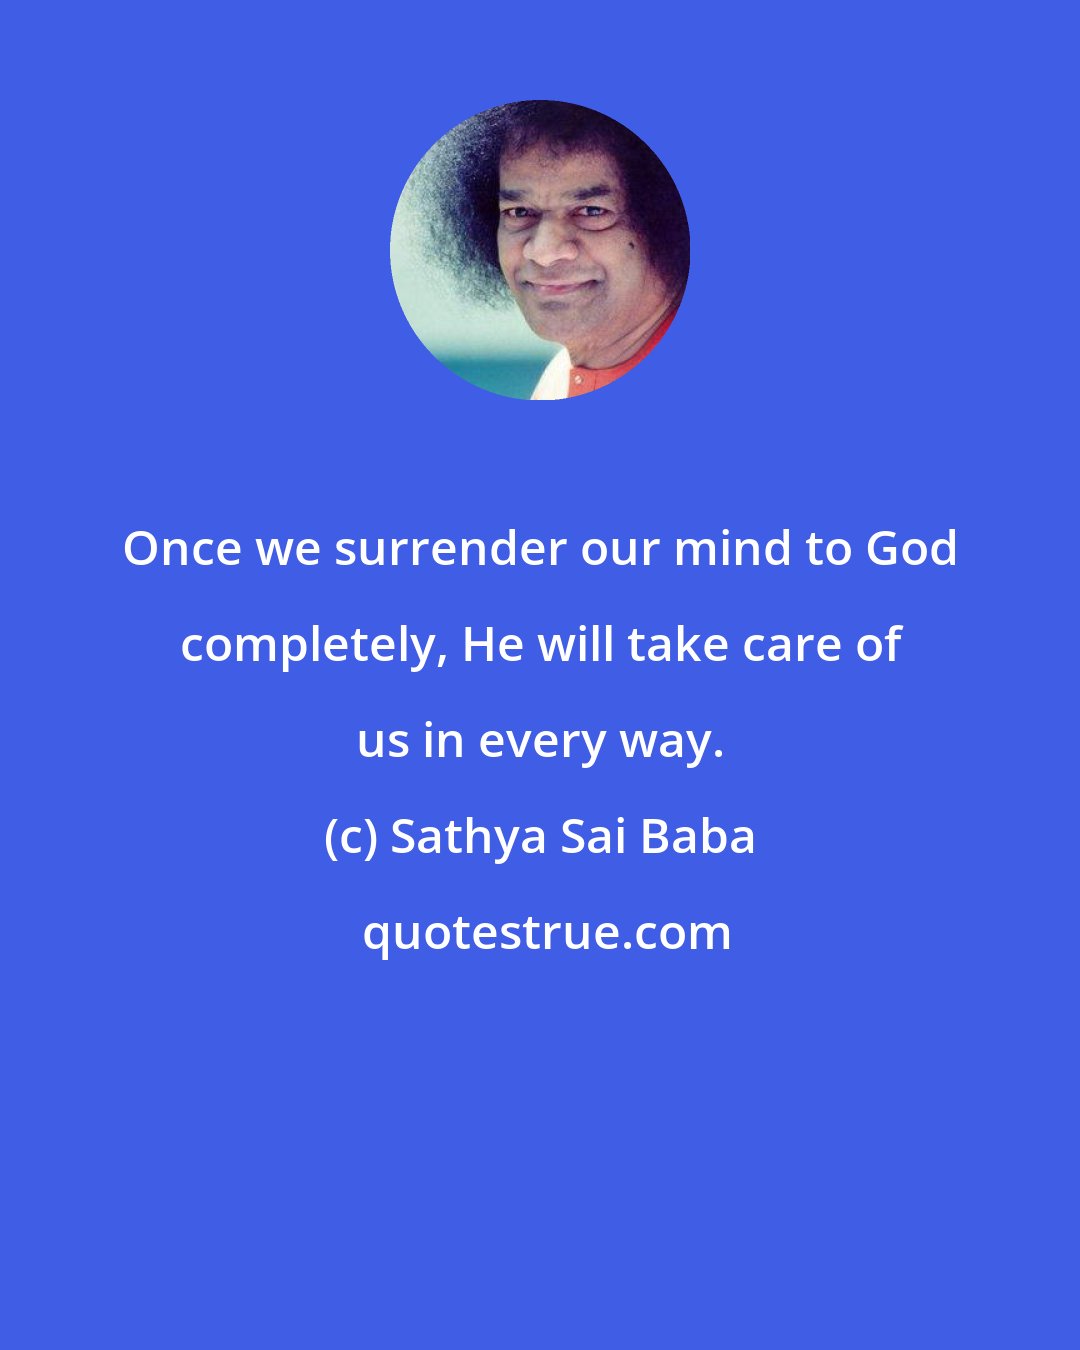 Sathya Sai Baba: Once we surrender our mind to God completely, He will take care of us in every way.